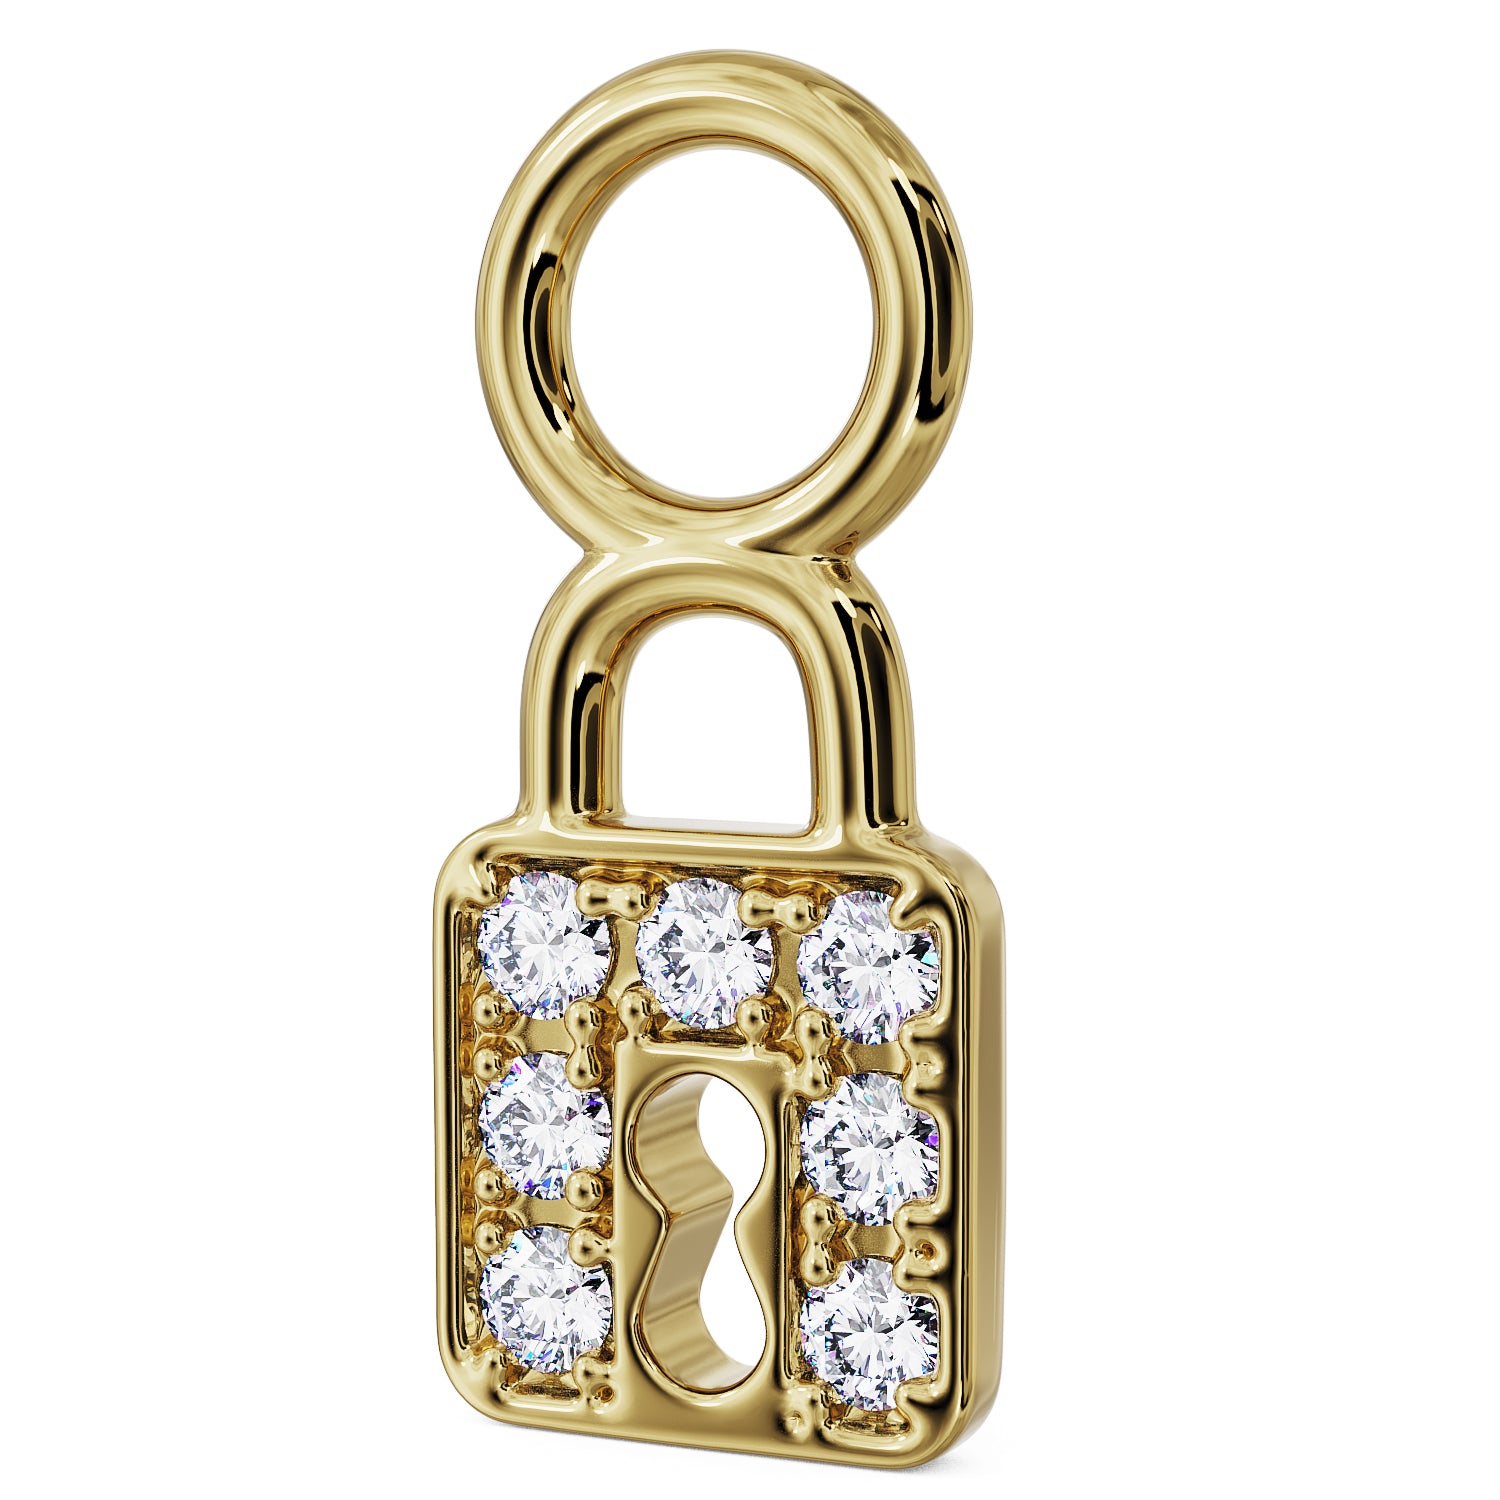 Side View Gold Lock Diamond Charm Accessory For Piercing Jewelry